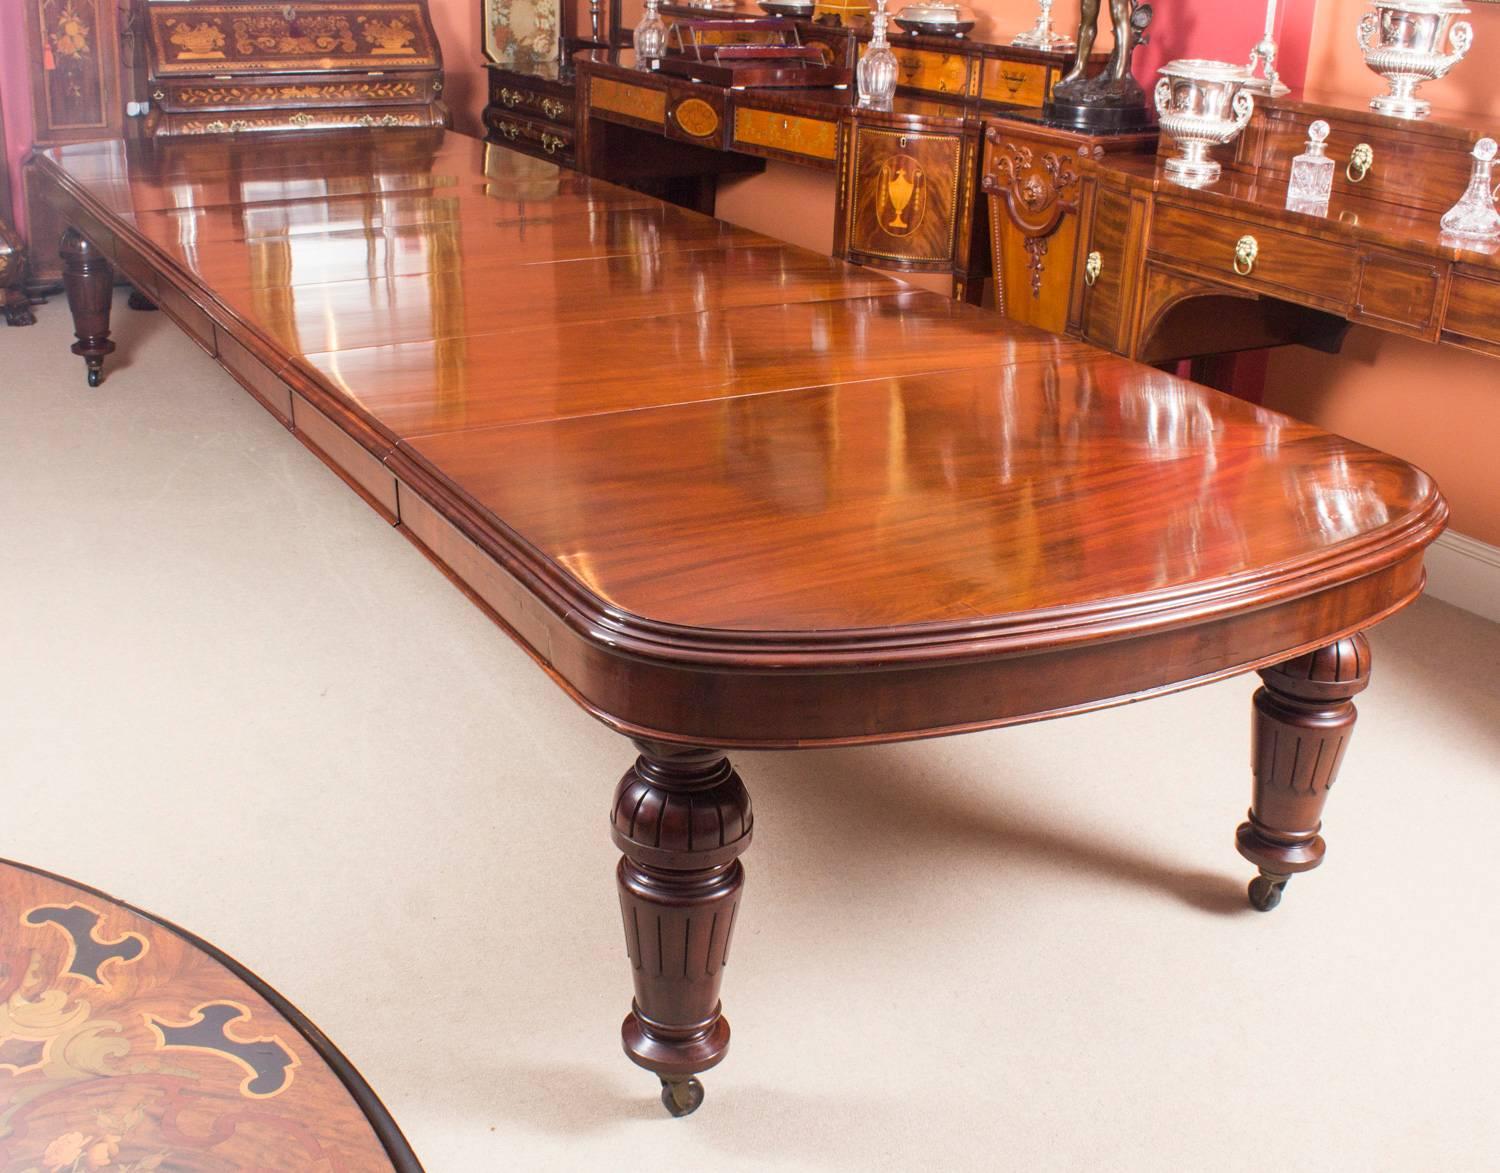 Victorian Antique D-End Mahogany Dining Table and 14 Upholstered Back Chairs, 19th Century